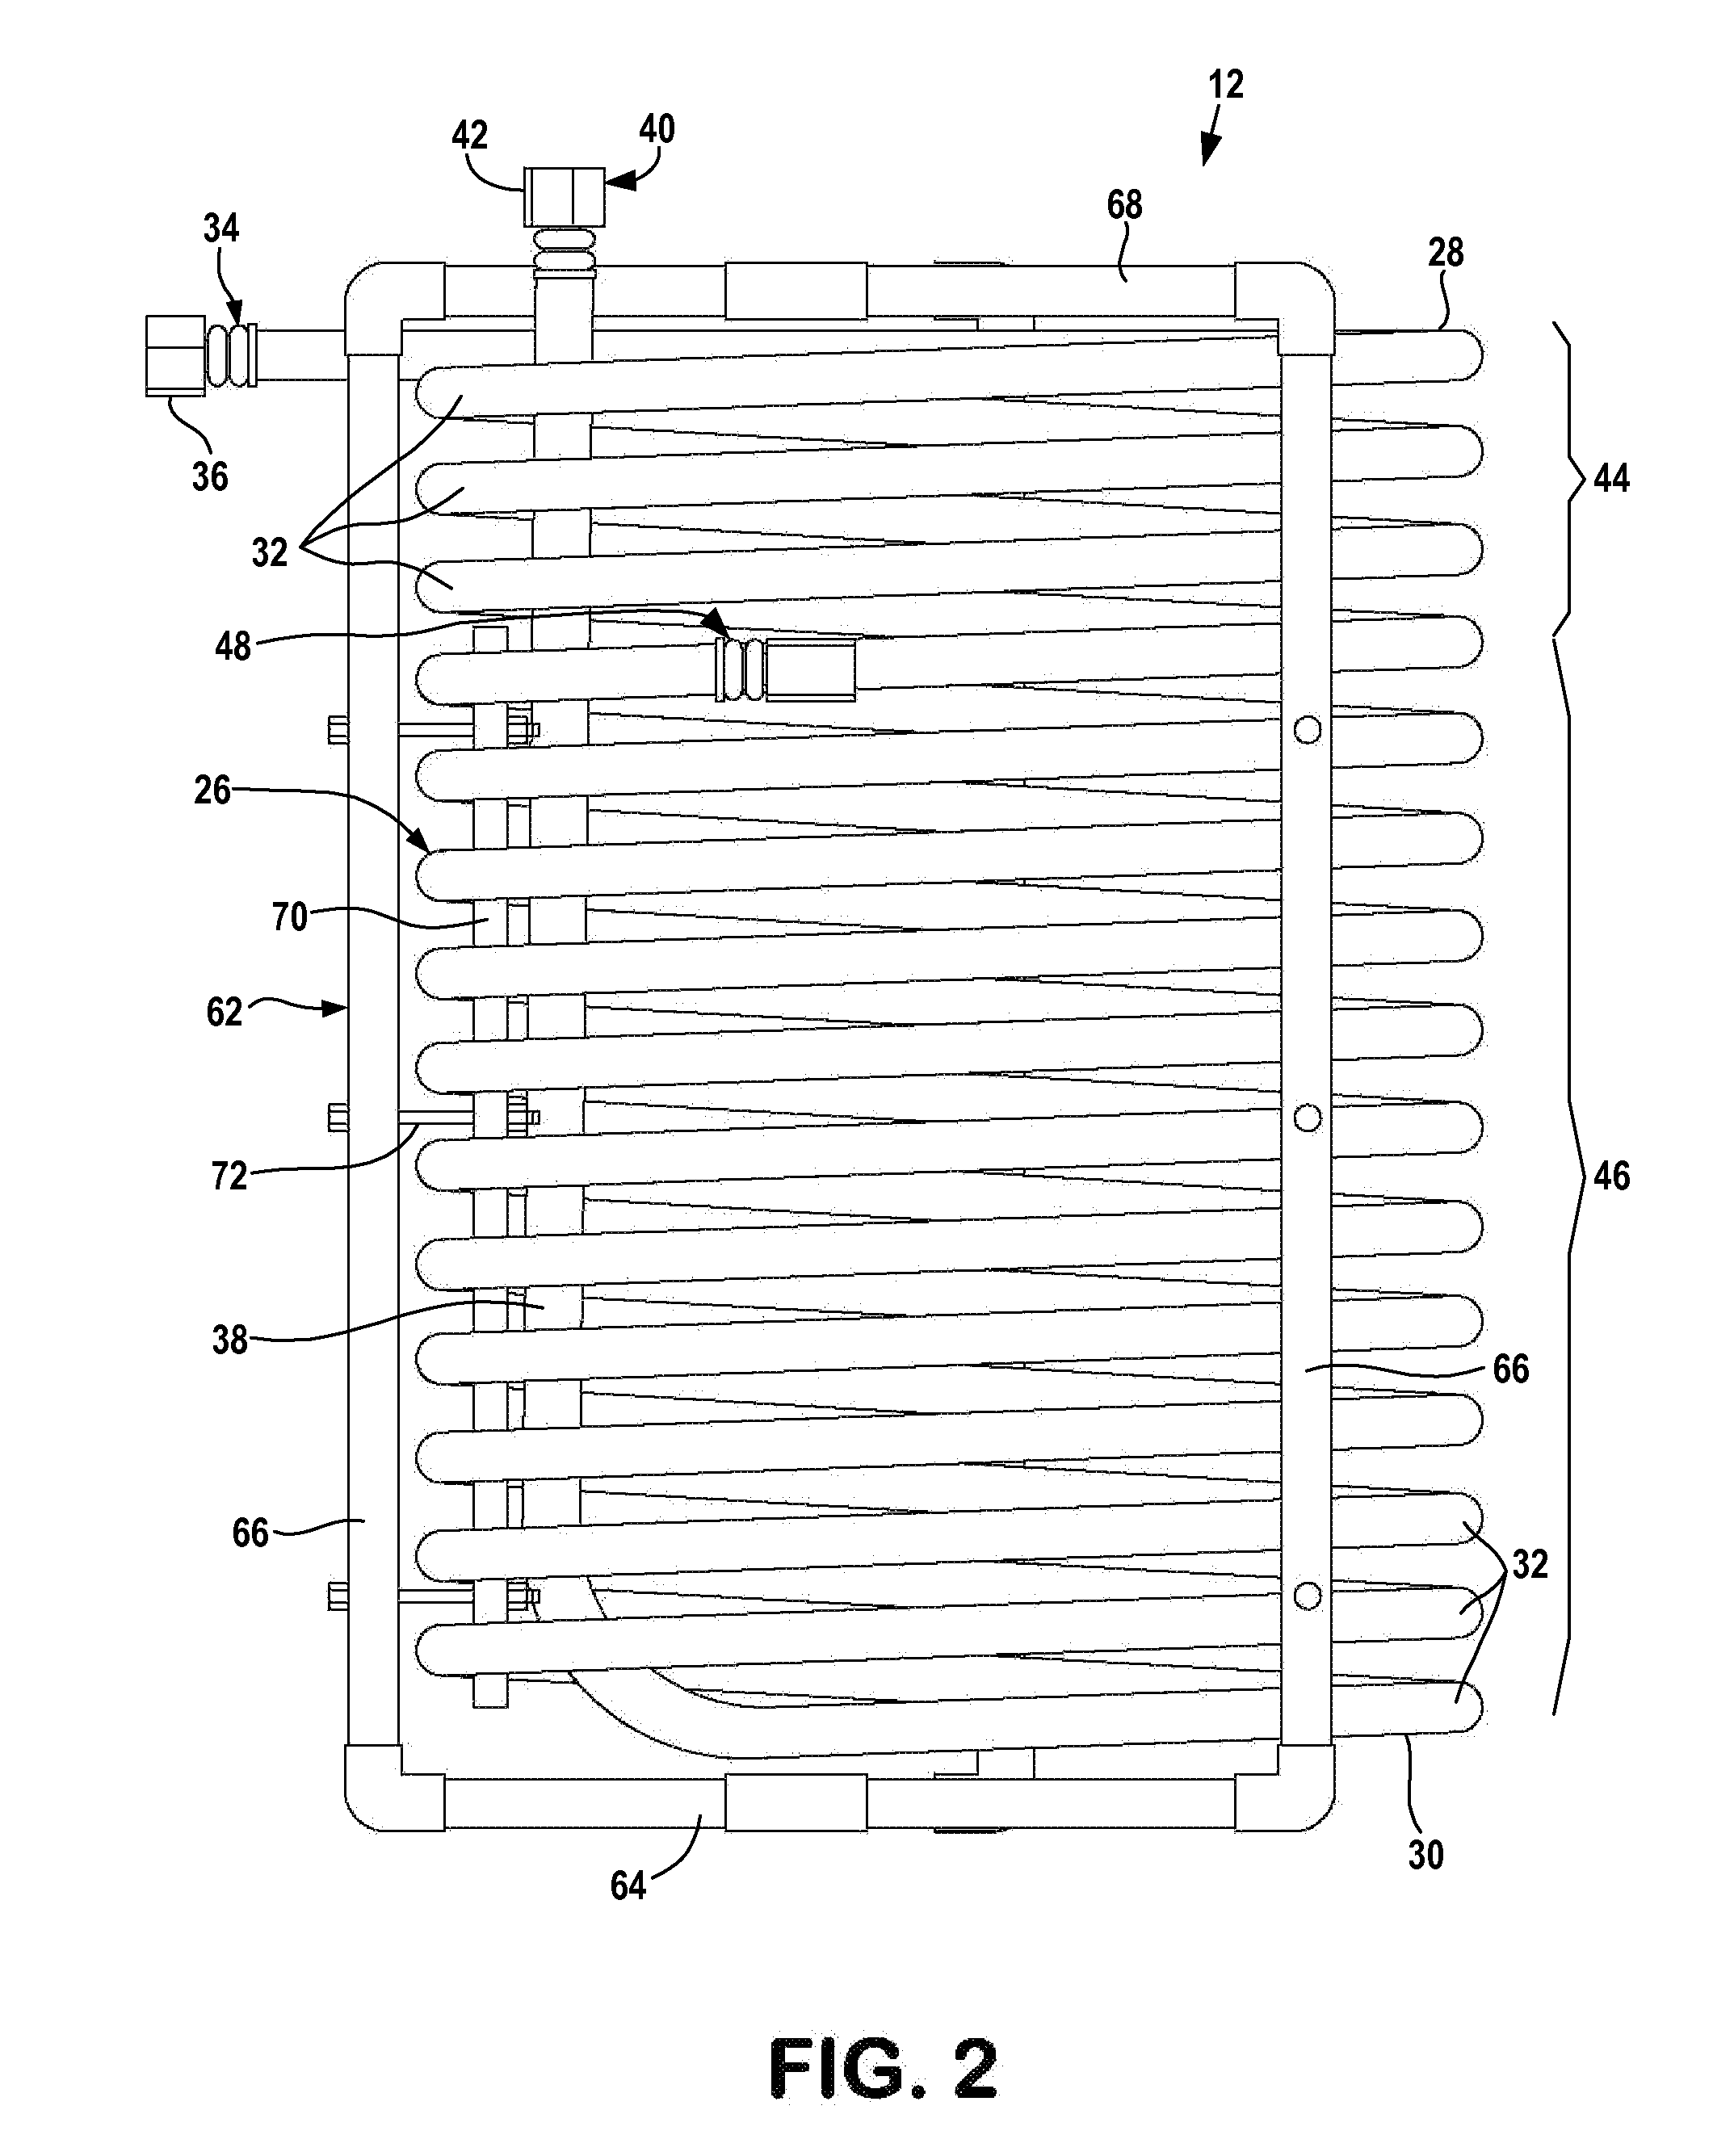 Heat Exchange Assembly and Method